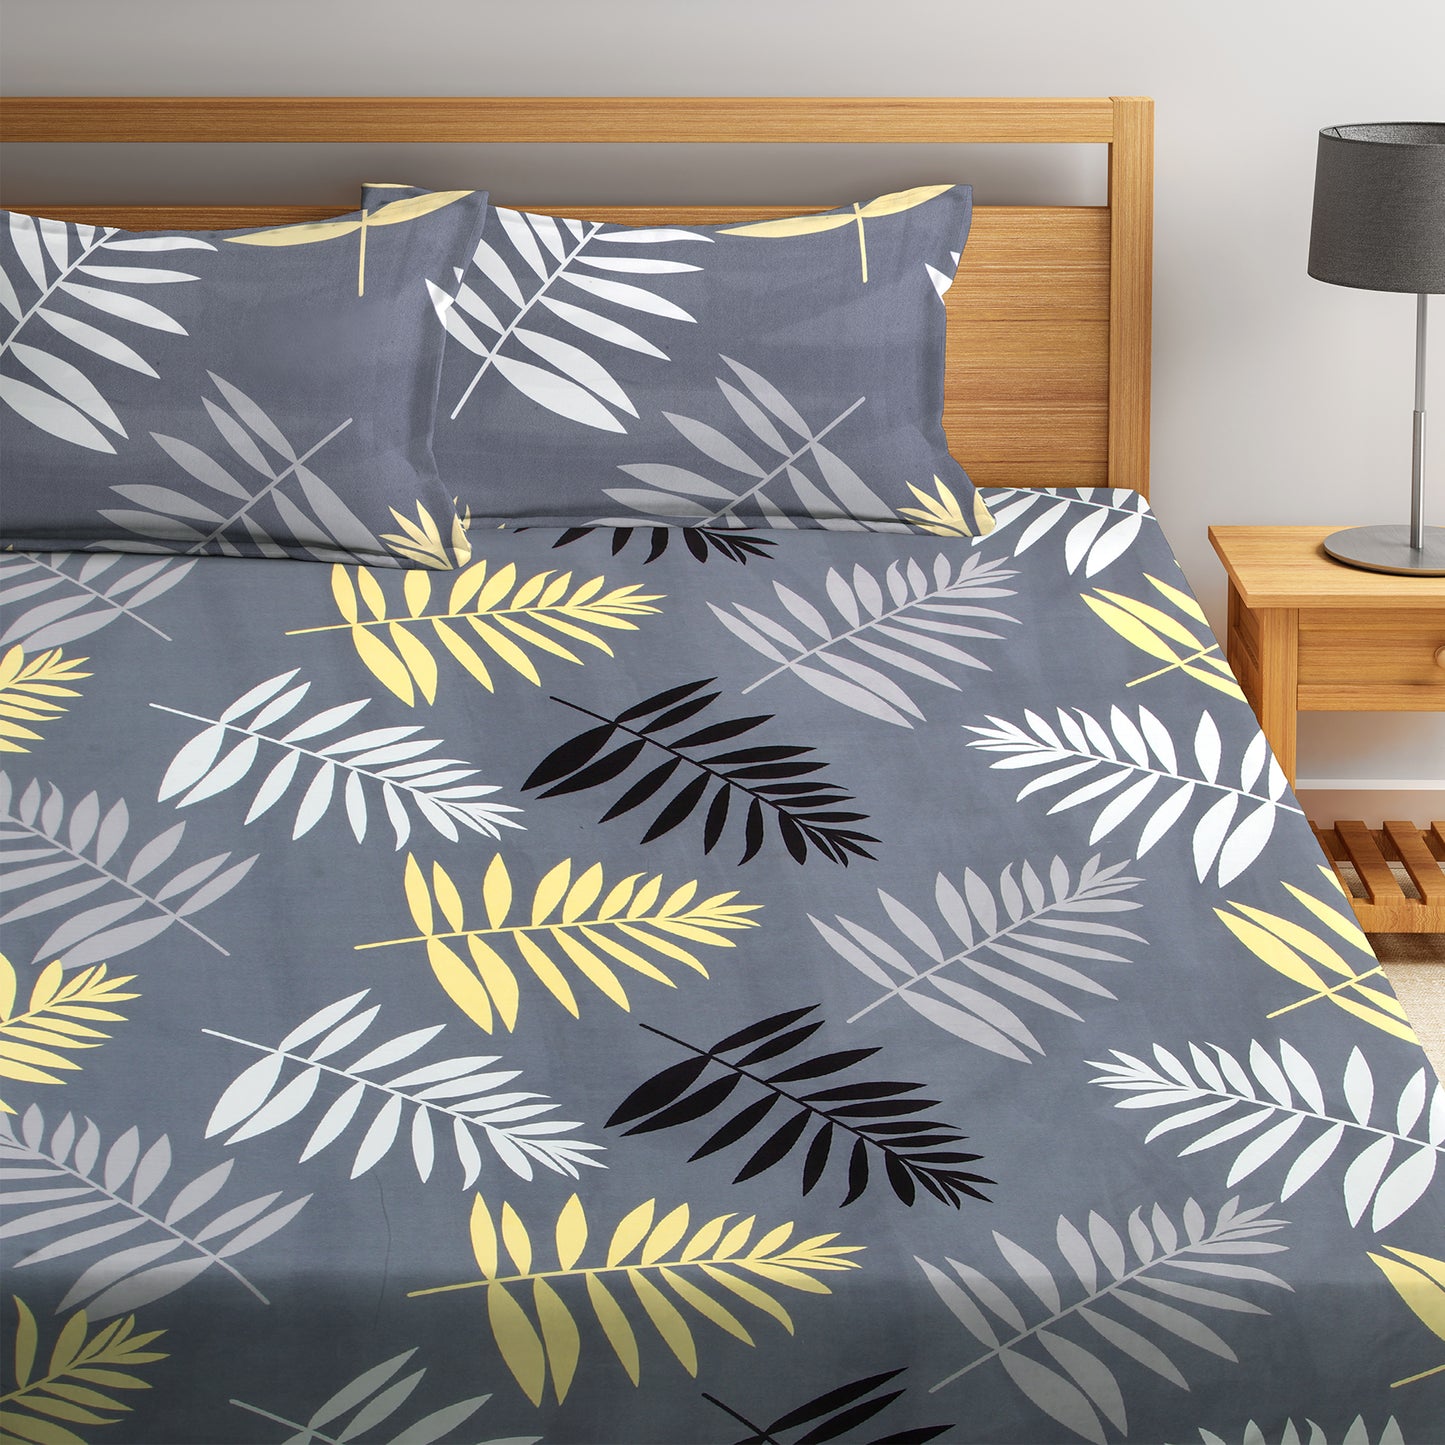 Grey Leaves King Size Cotton Bed Sheet Set with 2 Pillow Covers by Klotthe® (250X225 cm)